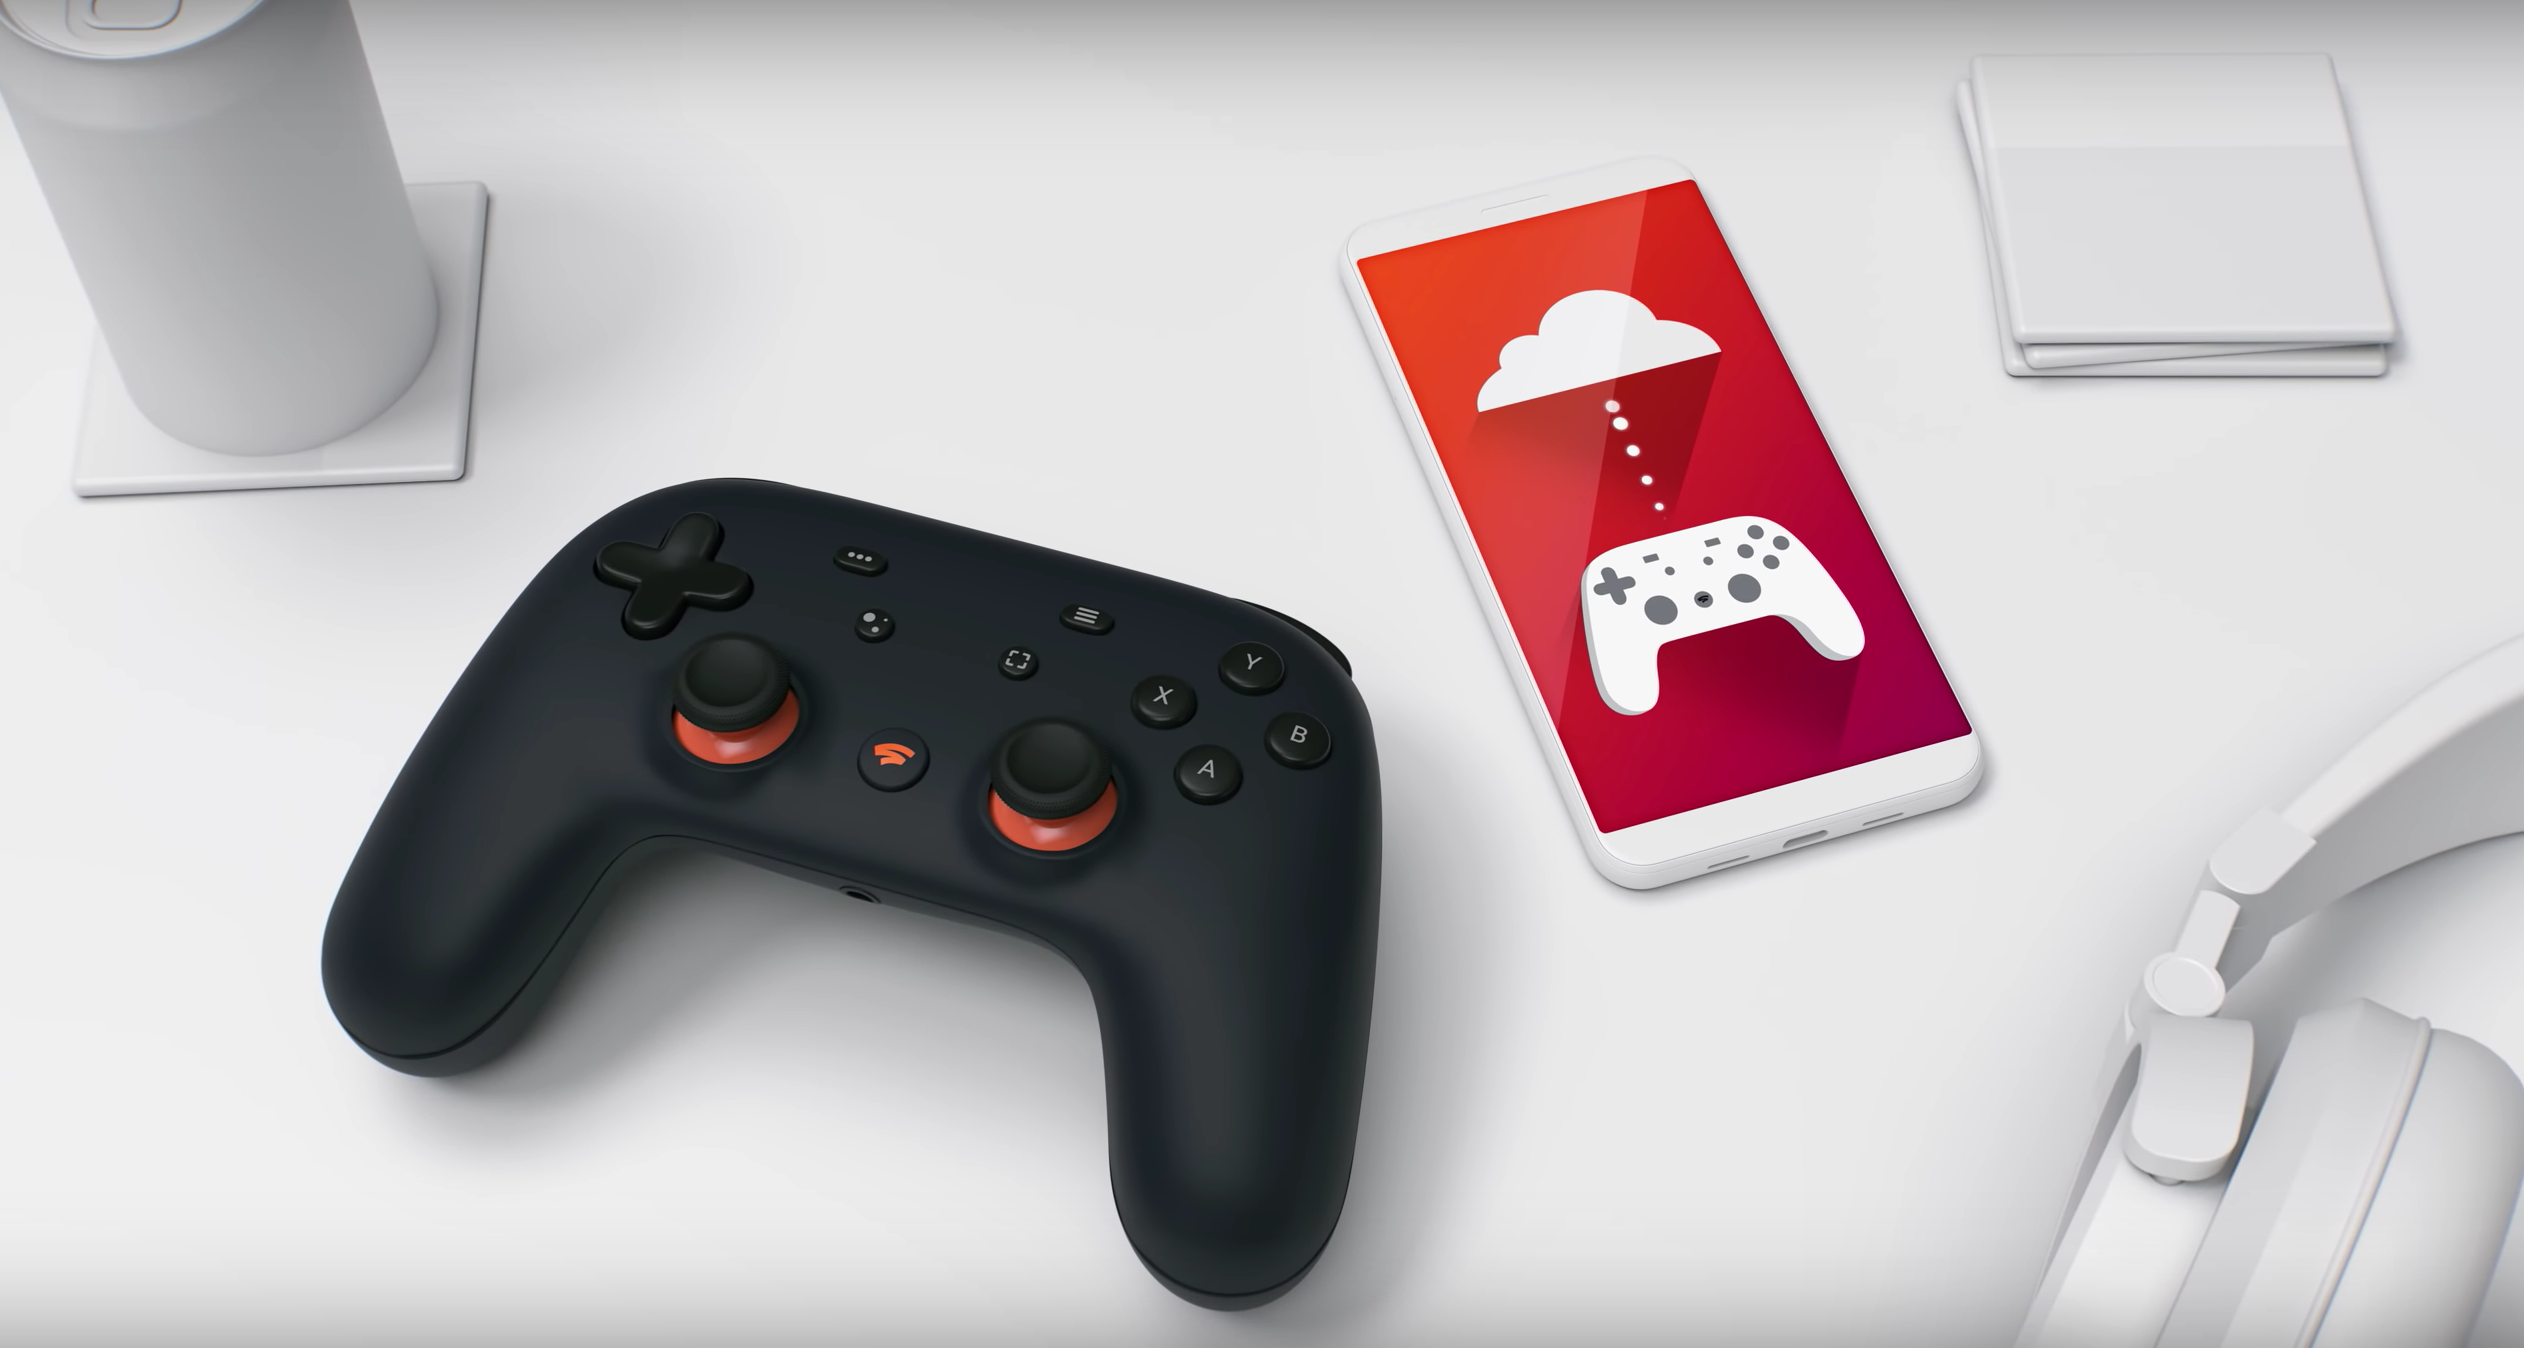 What You Need To Know About The Google Stadia Founder’s Pack